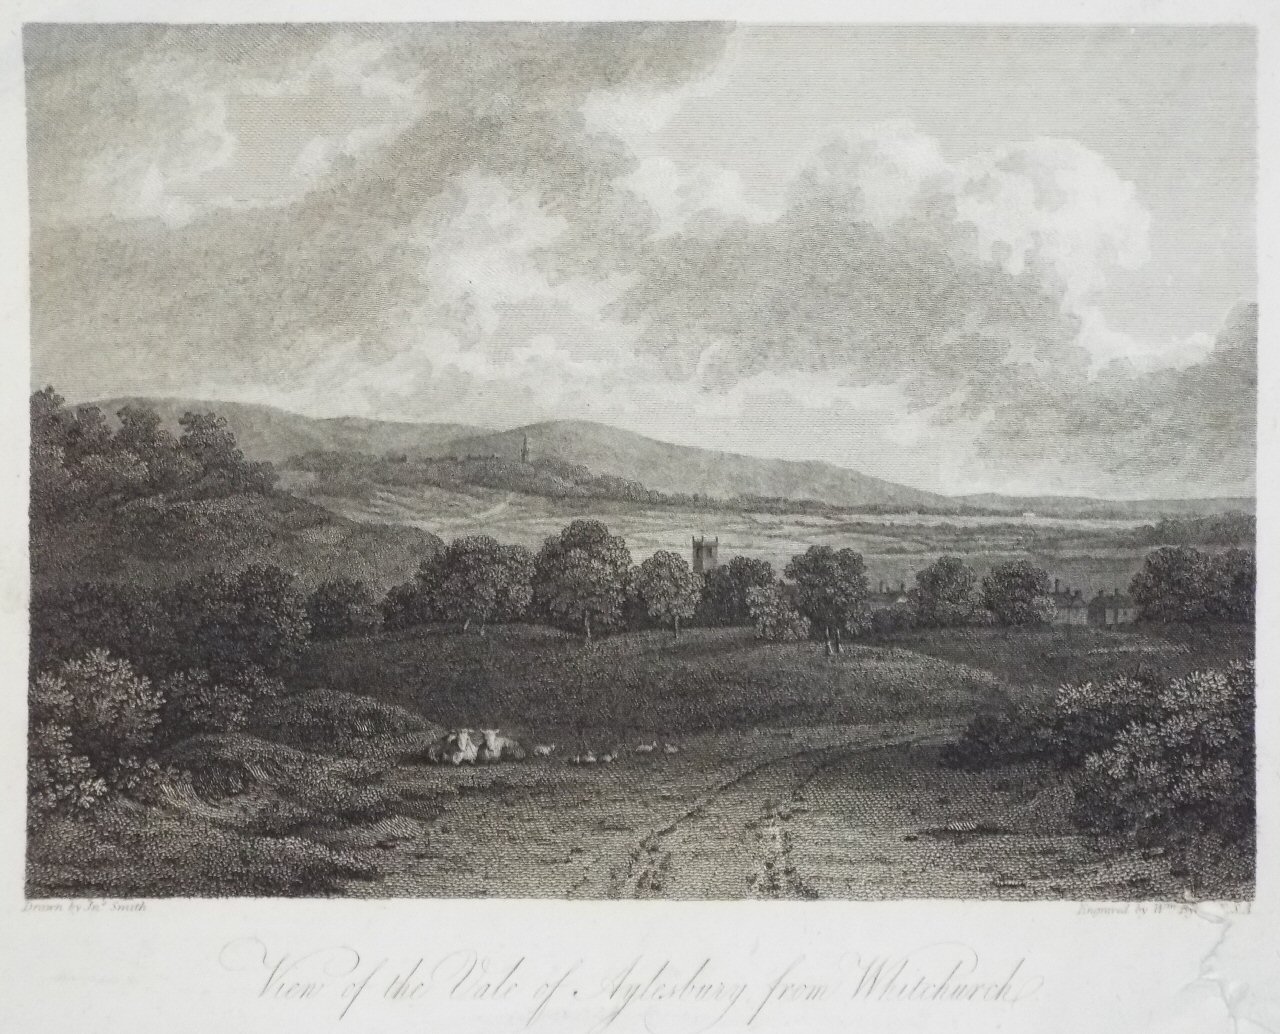 Print - View of the Vale of Aylesbury, from Whitchurch. - Byrne